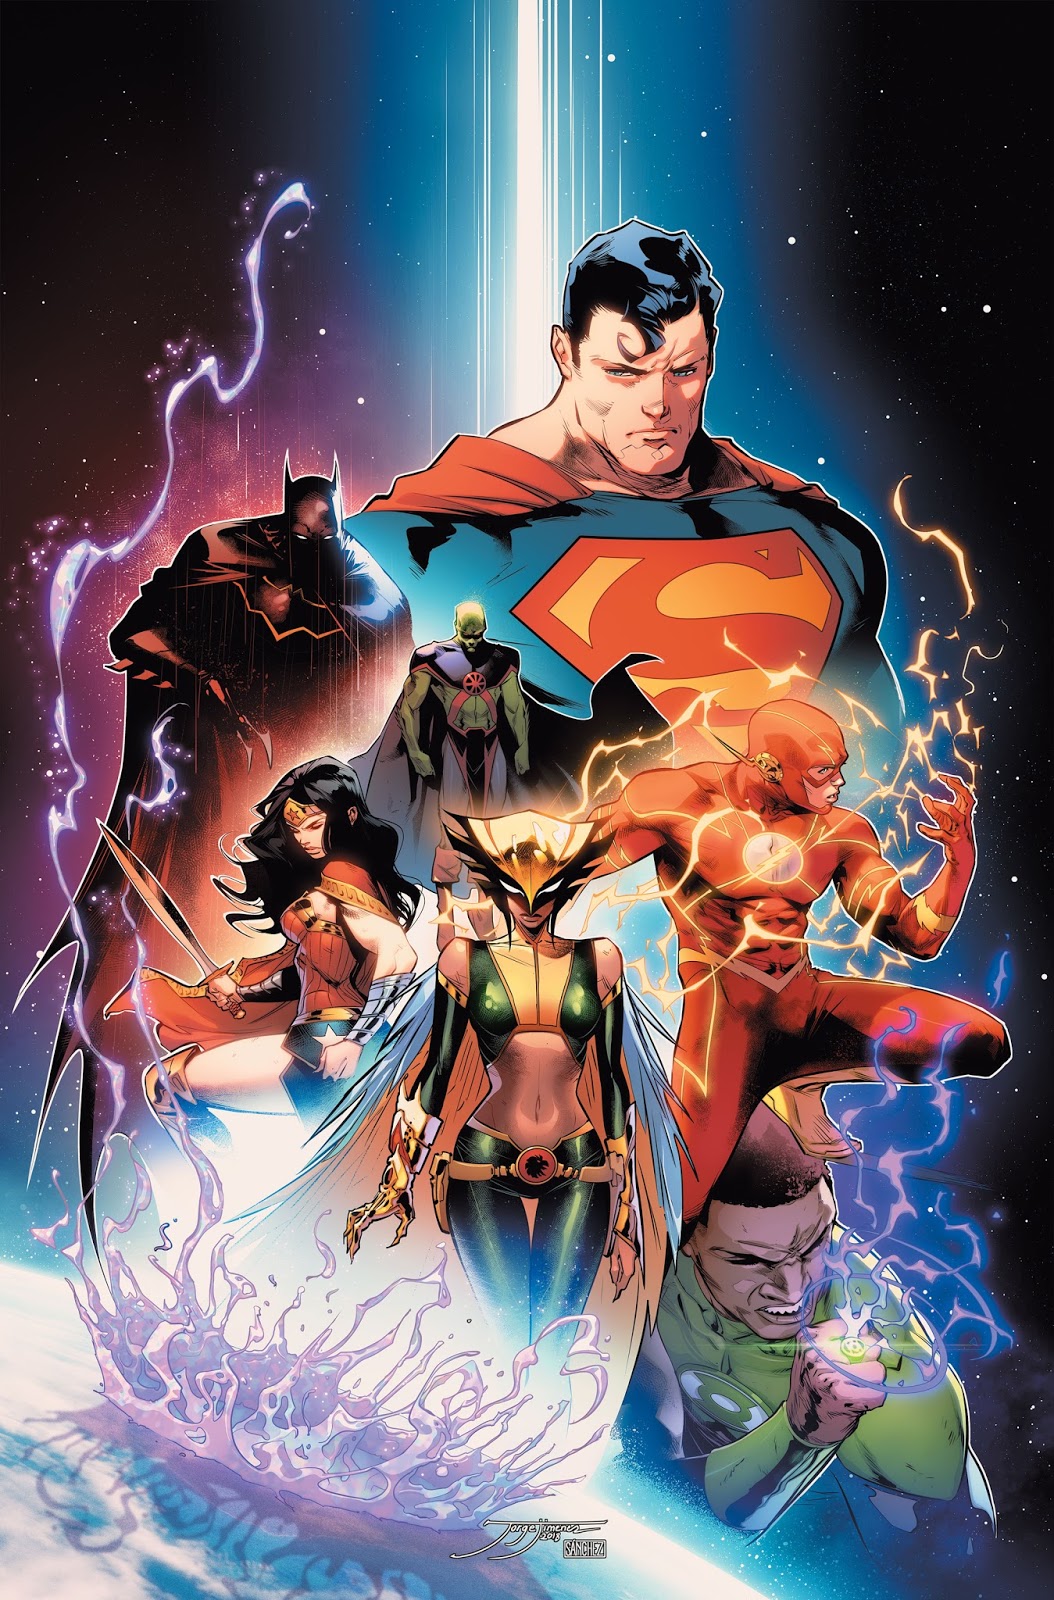 Weird Science DC Comics: Scott Snyder's Justice League Launches in June